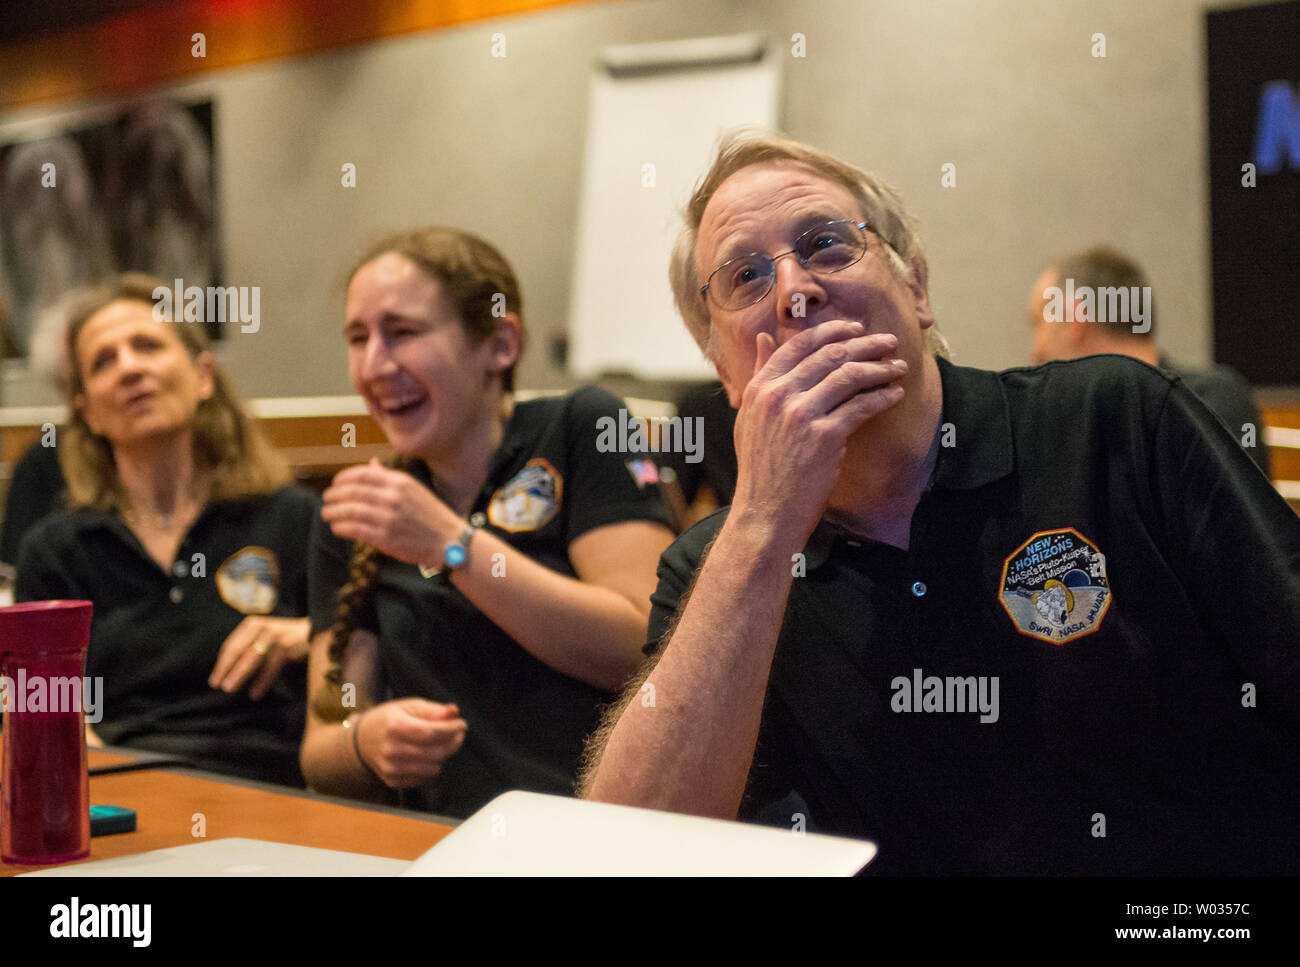 Members of the New Horizons science team react to seeing the spacecraft's last and sharpest image of Pluto before closest approach later in the day, Tuesday, July 14, 2015 at the Johns Hopkins University Applied Physics Laboratory  in Laurel, Maryland on July 14, 2015.  The spacecraft was launched nine years ago and traveled 3 billion miles. NASA Photo by Bill Ingalls/UPI Stock Photo